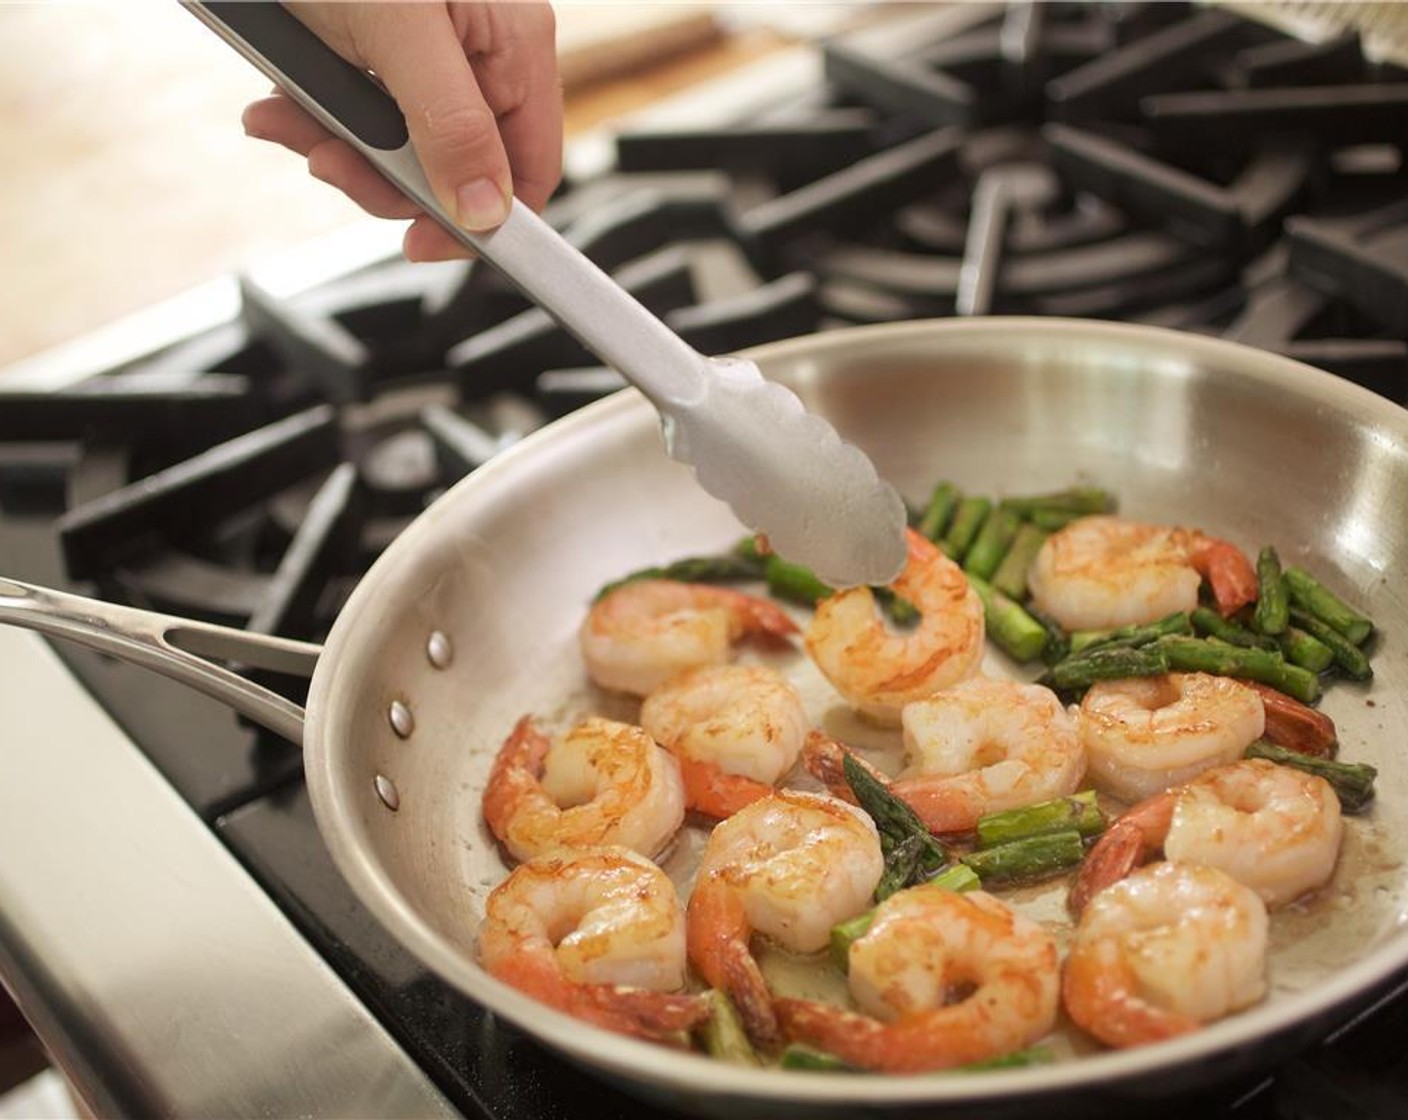 step 8 Using tongs, carefully add the Jumbo Shrimp (12) to the saute pan in a single layer. Add Worcestershire Sauce (1 tsp) and cook shrimp on each side for 1 minute. Remove from heat and hold for plating.